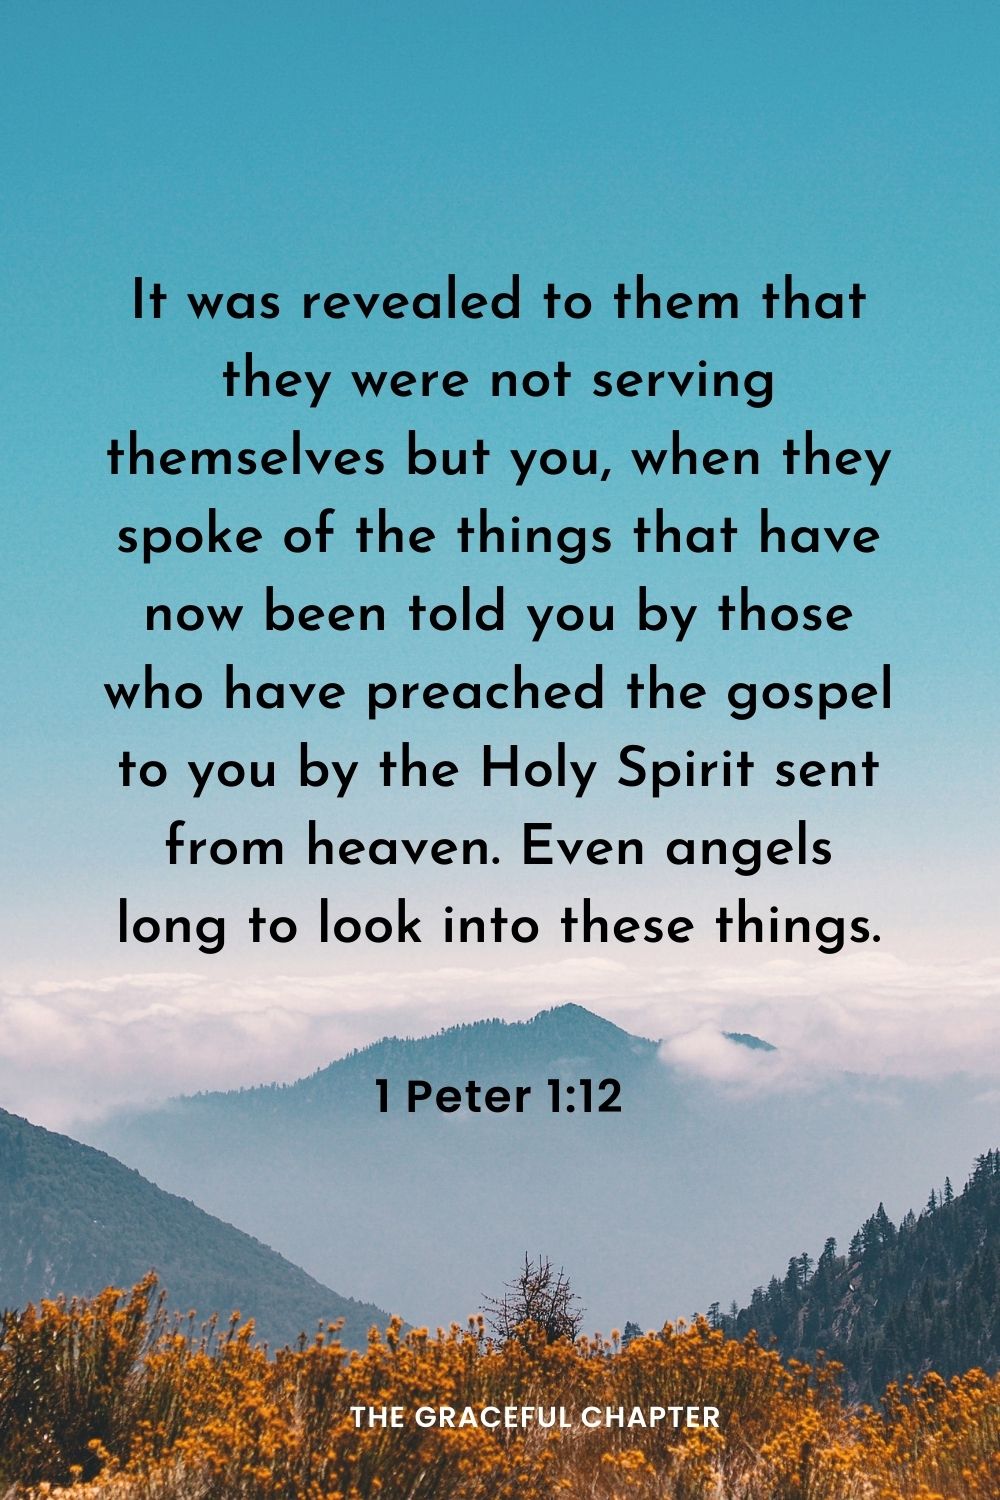 It was revealed to them that they were not serving themselves but you, when they spoke of the things that have now been told you by those who have preached the gospel to you by the Holy Spirit sent from heaven. Even angels long to look into these things.